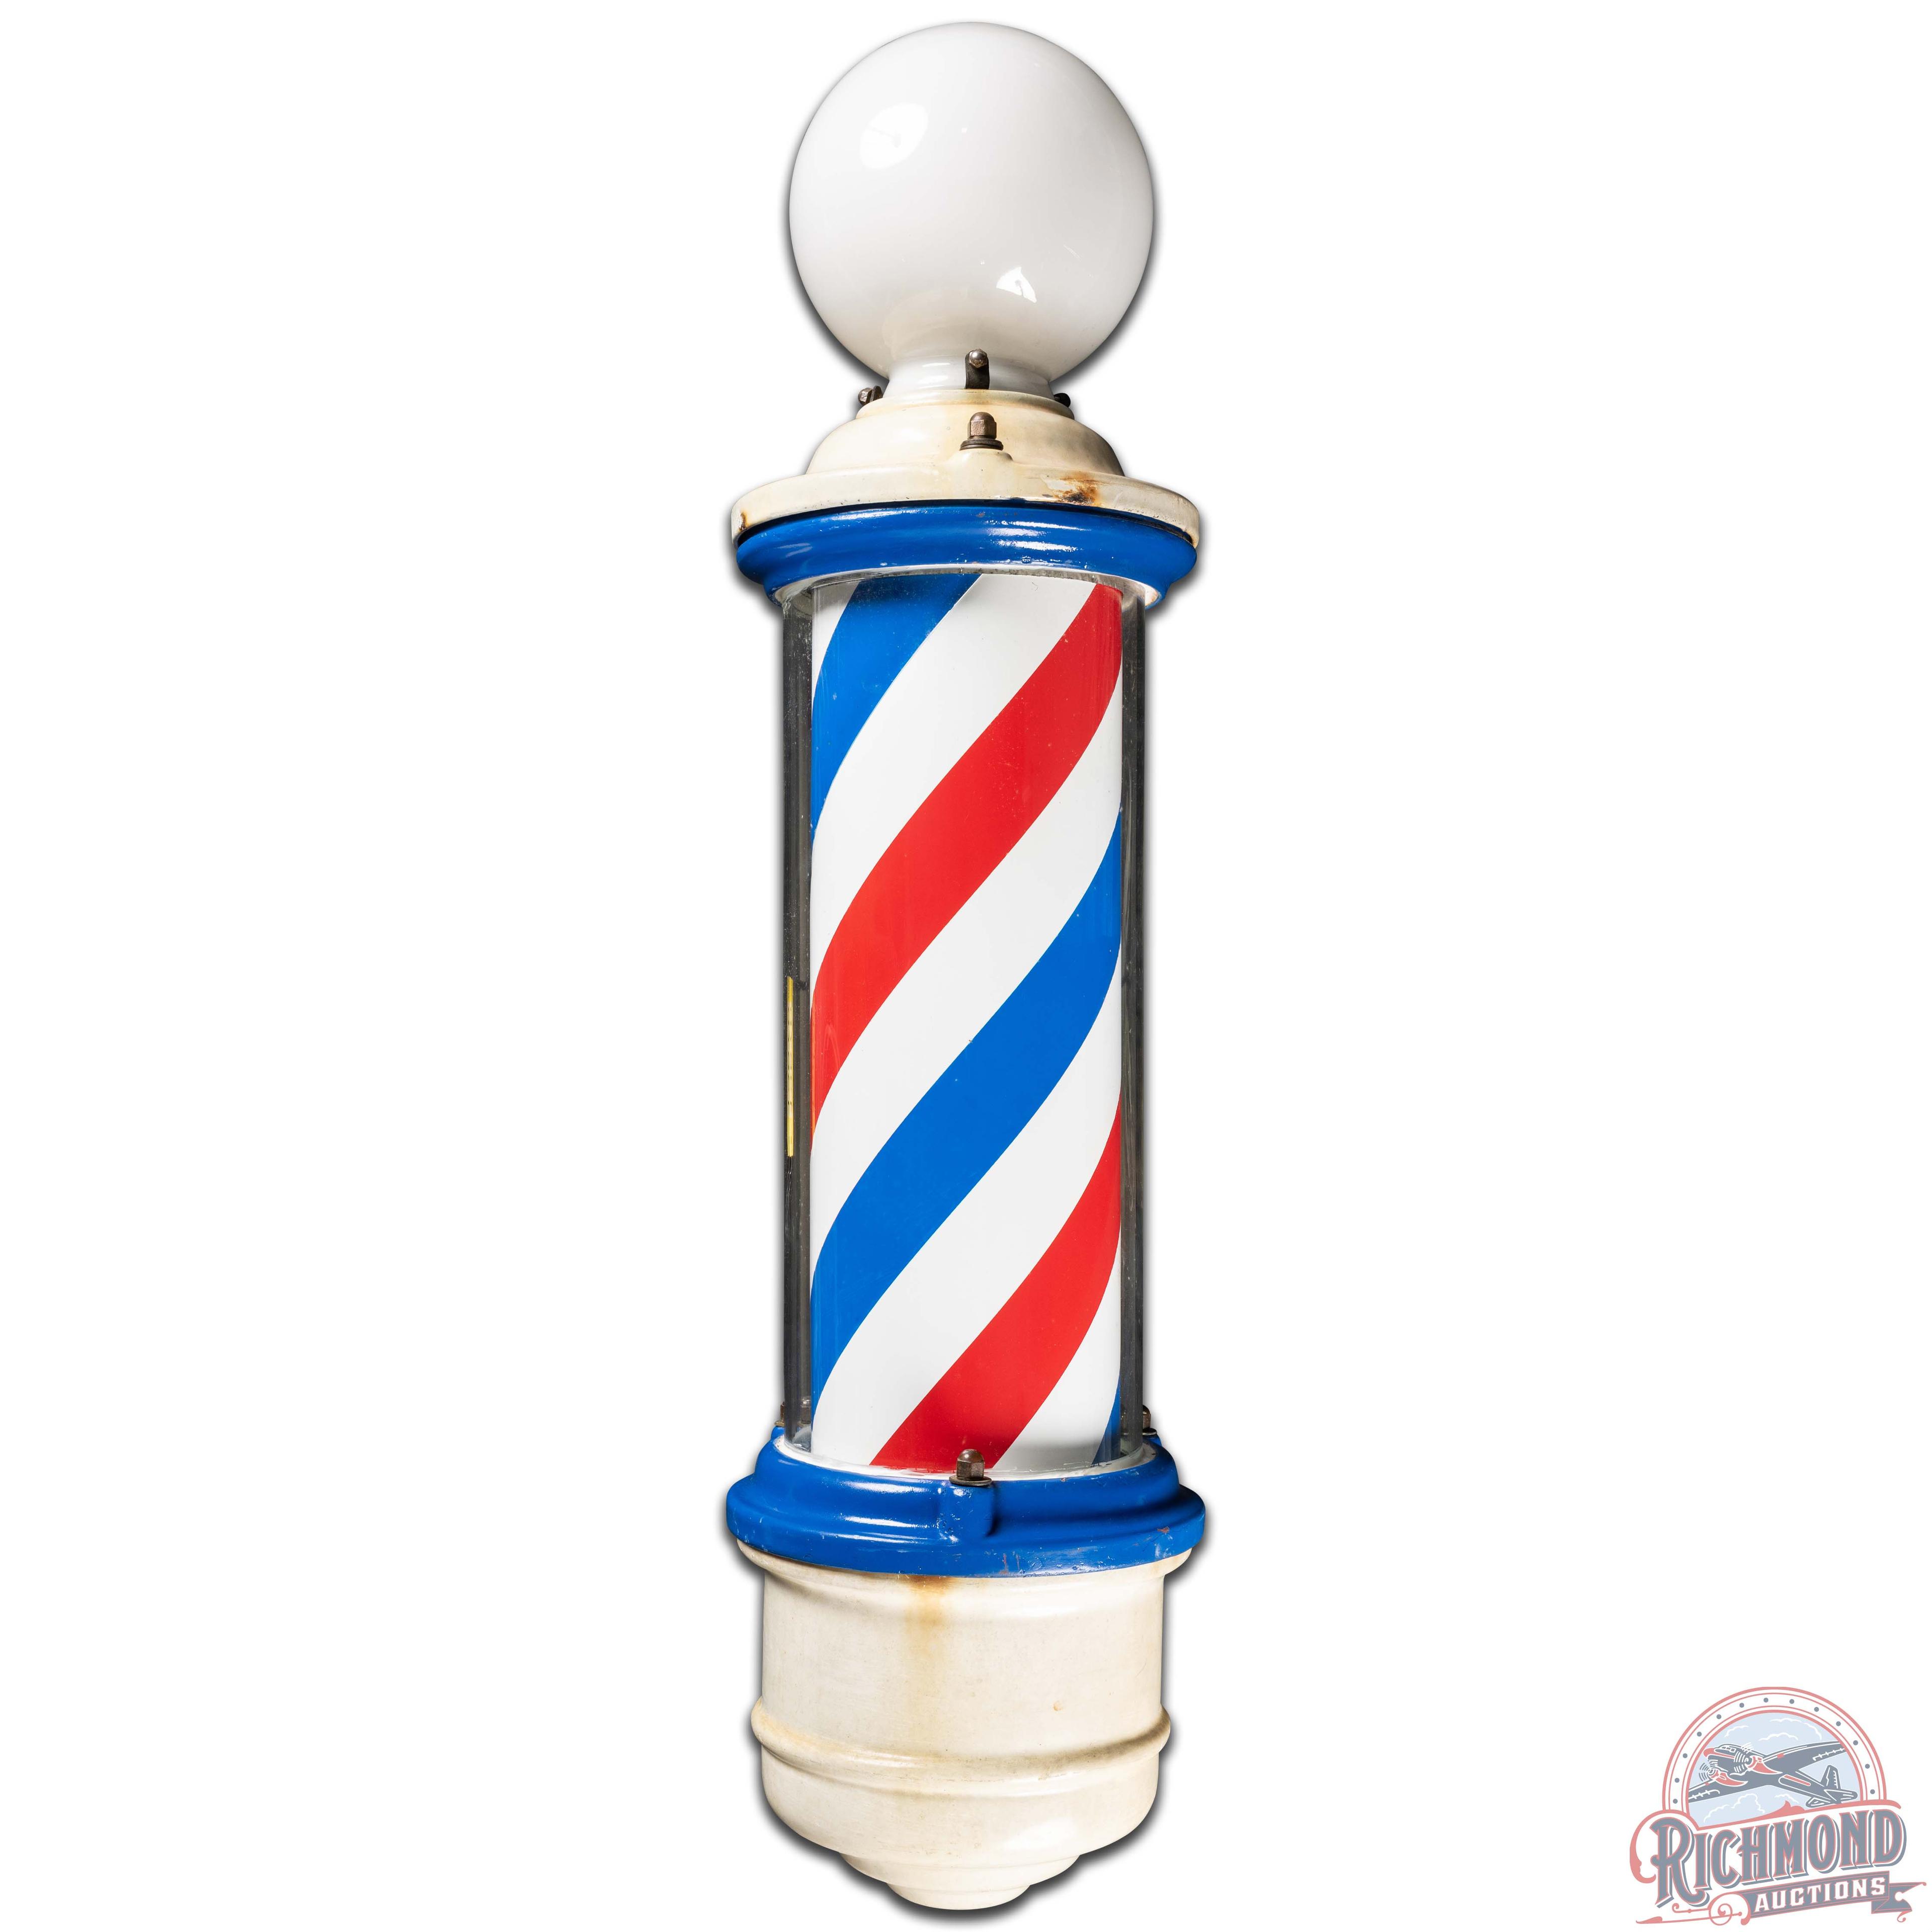 Lighted Wall Mount Glass Barber Pole with Motion